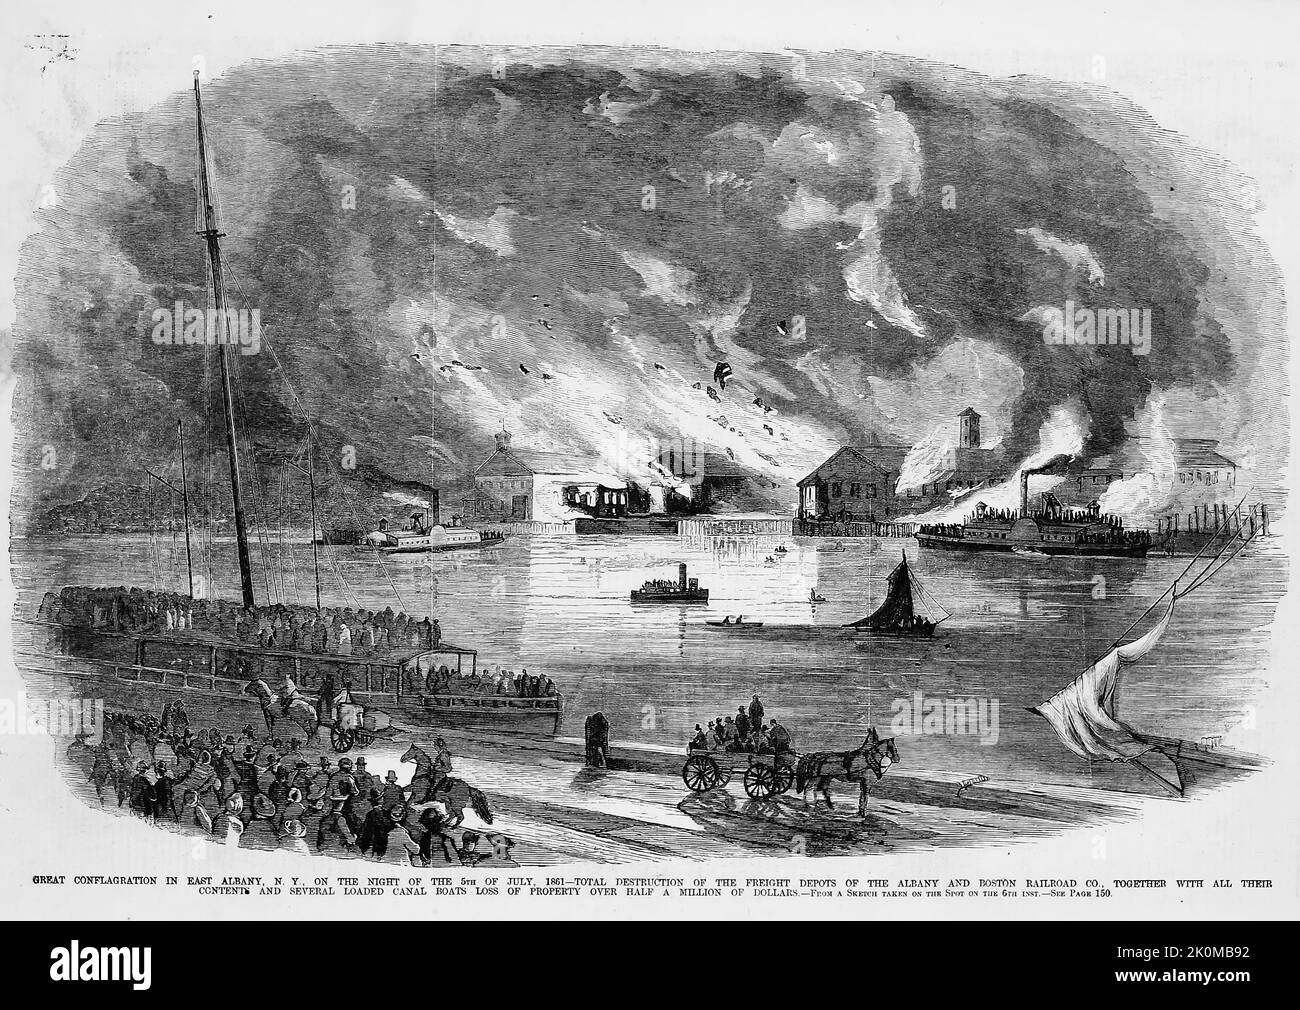 Great conflagration in East Albany, New York, on the night of July 5th, 1861 - Total destruction of the freight depots of the Albany and Boston Railroad Company, together with all their contents and several loaded canal boats - Loss of property over half a million dollars. 19th century illustration from Frank Leslie's Illustrated Newspaper Stock Photo